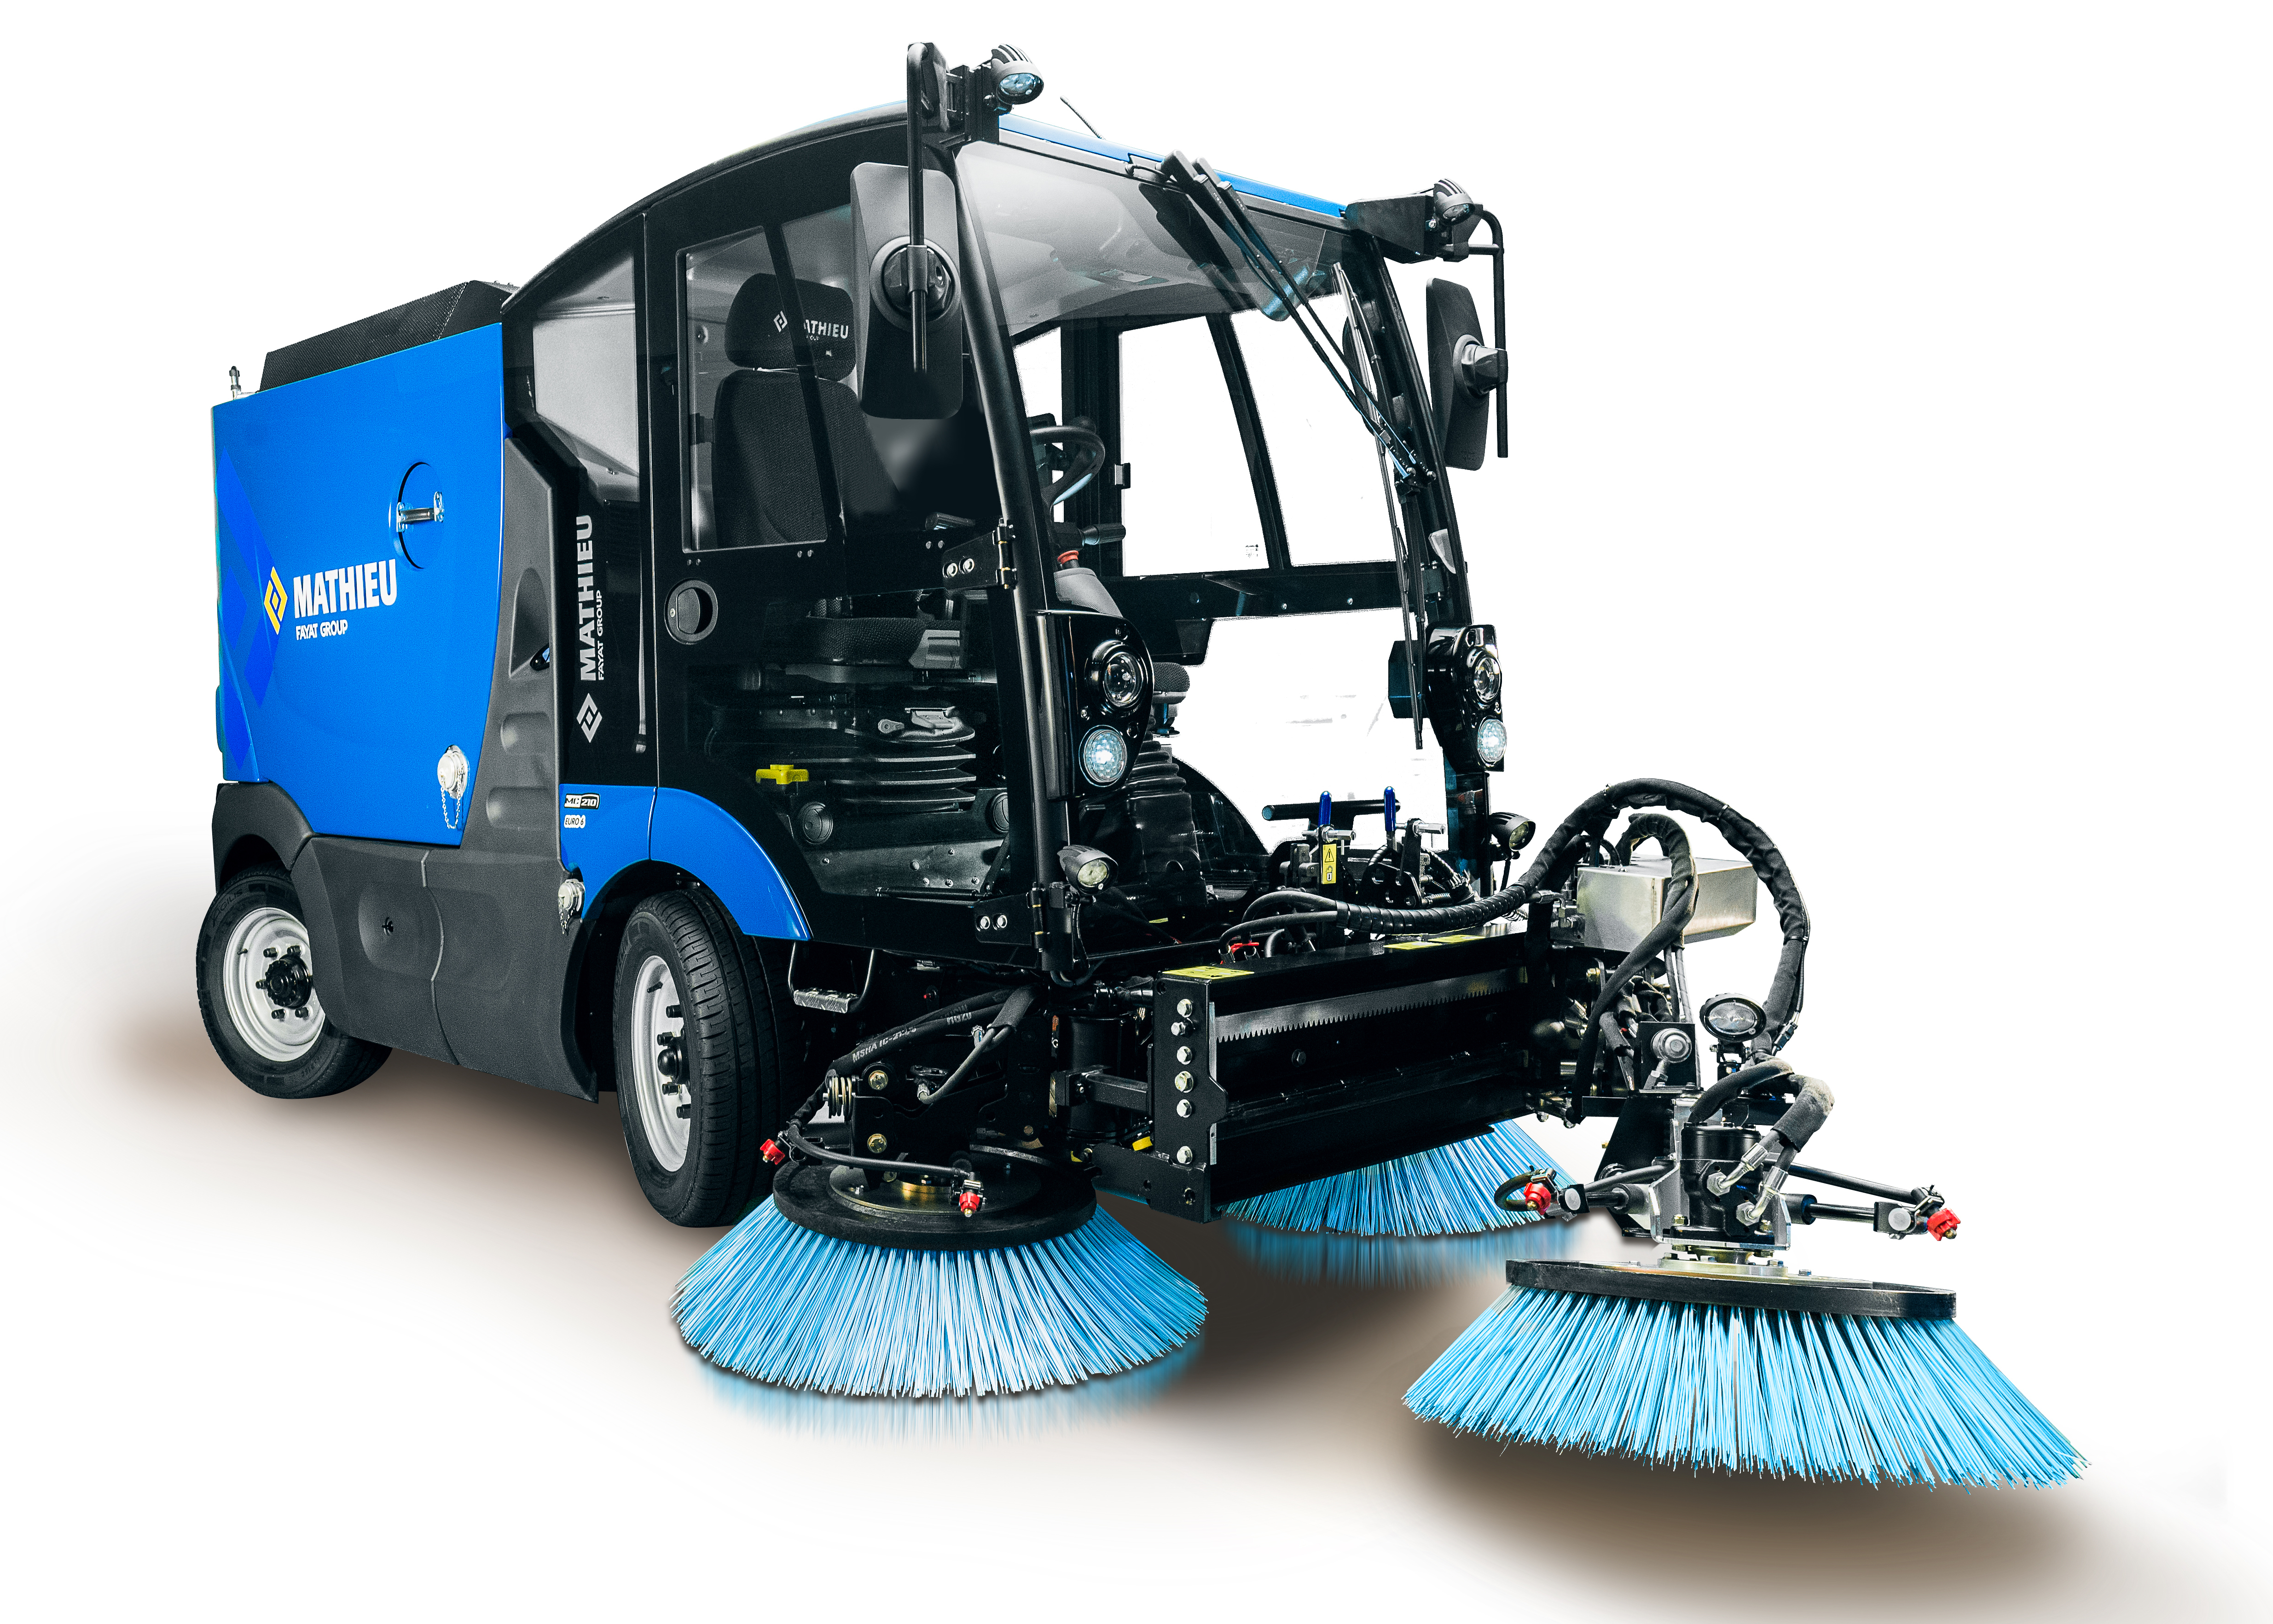 EXCEPTIONAL SWEEPING PERFORMANCE